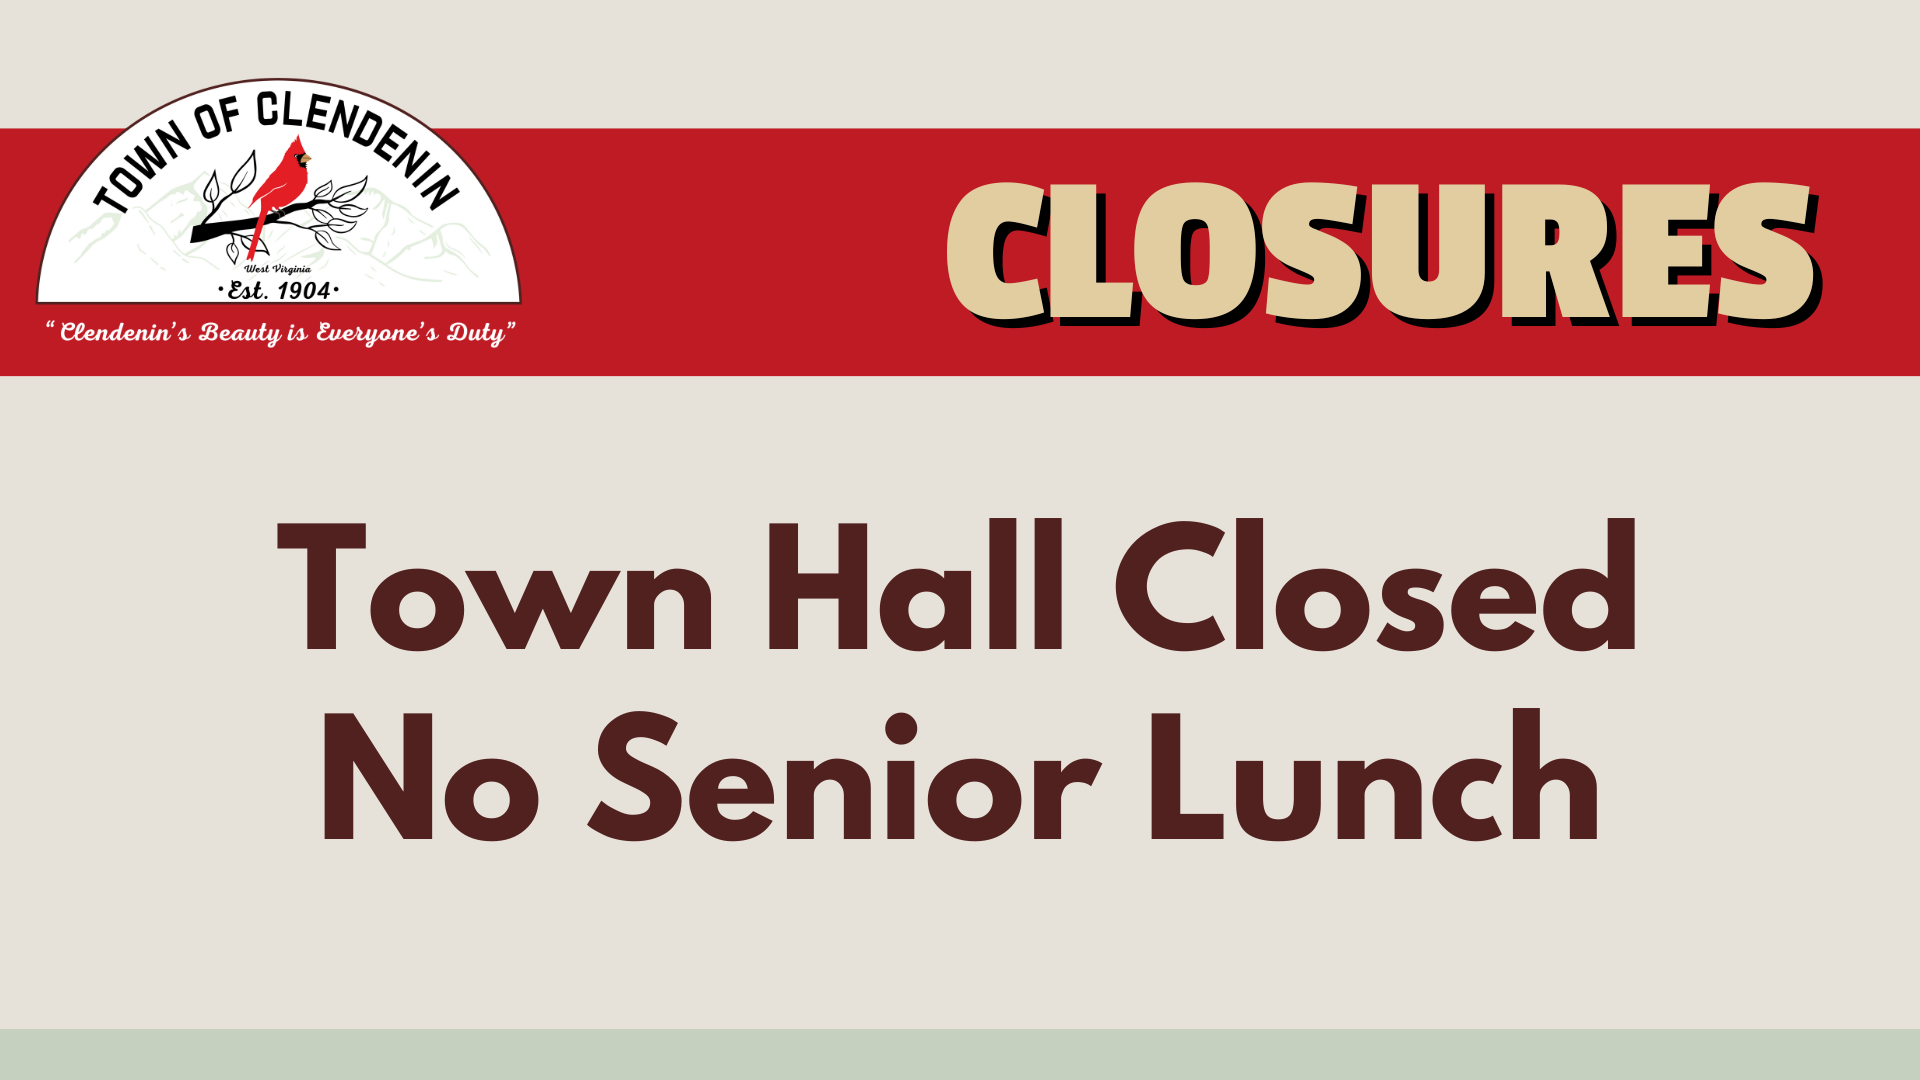 Town Hall Closed. No Senior Lunch